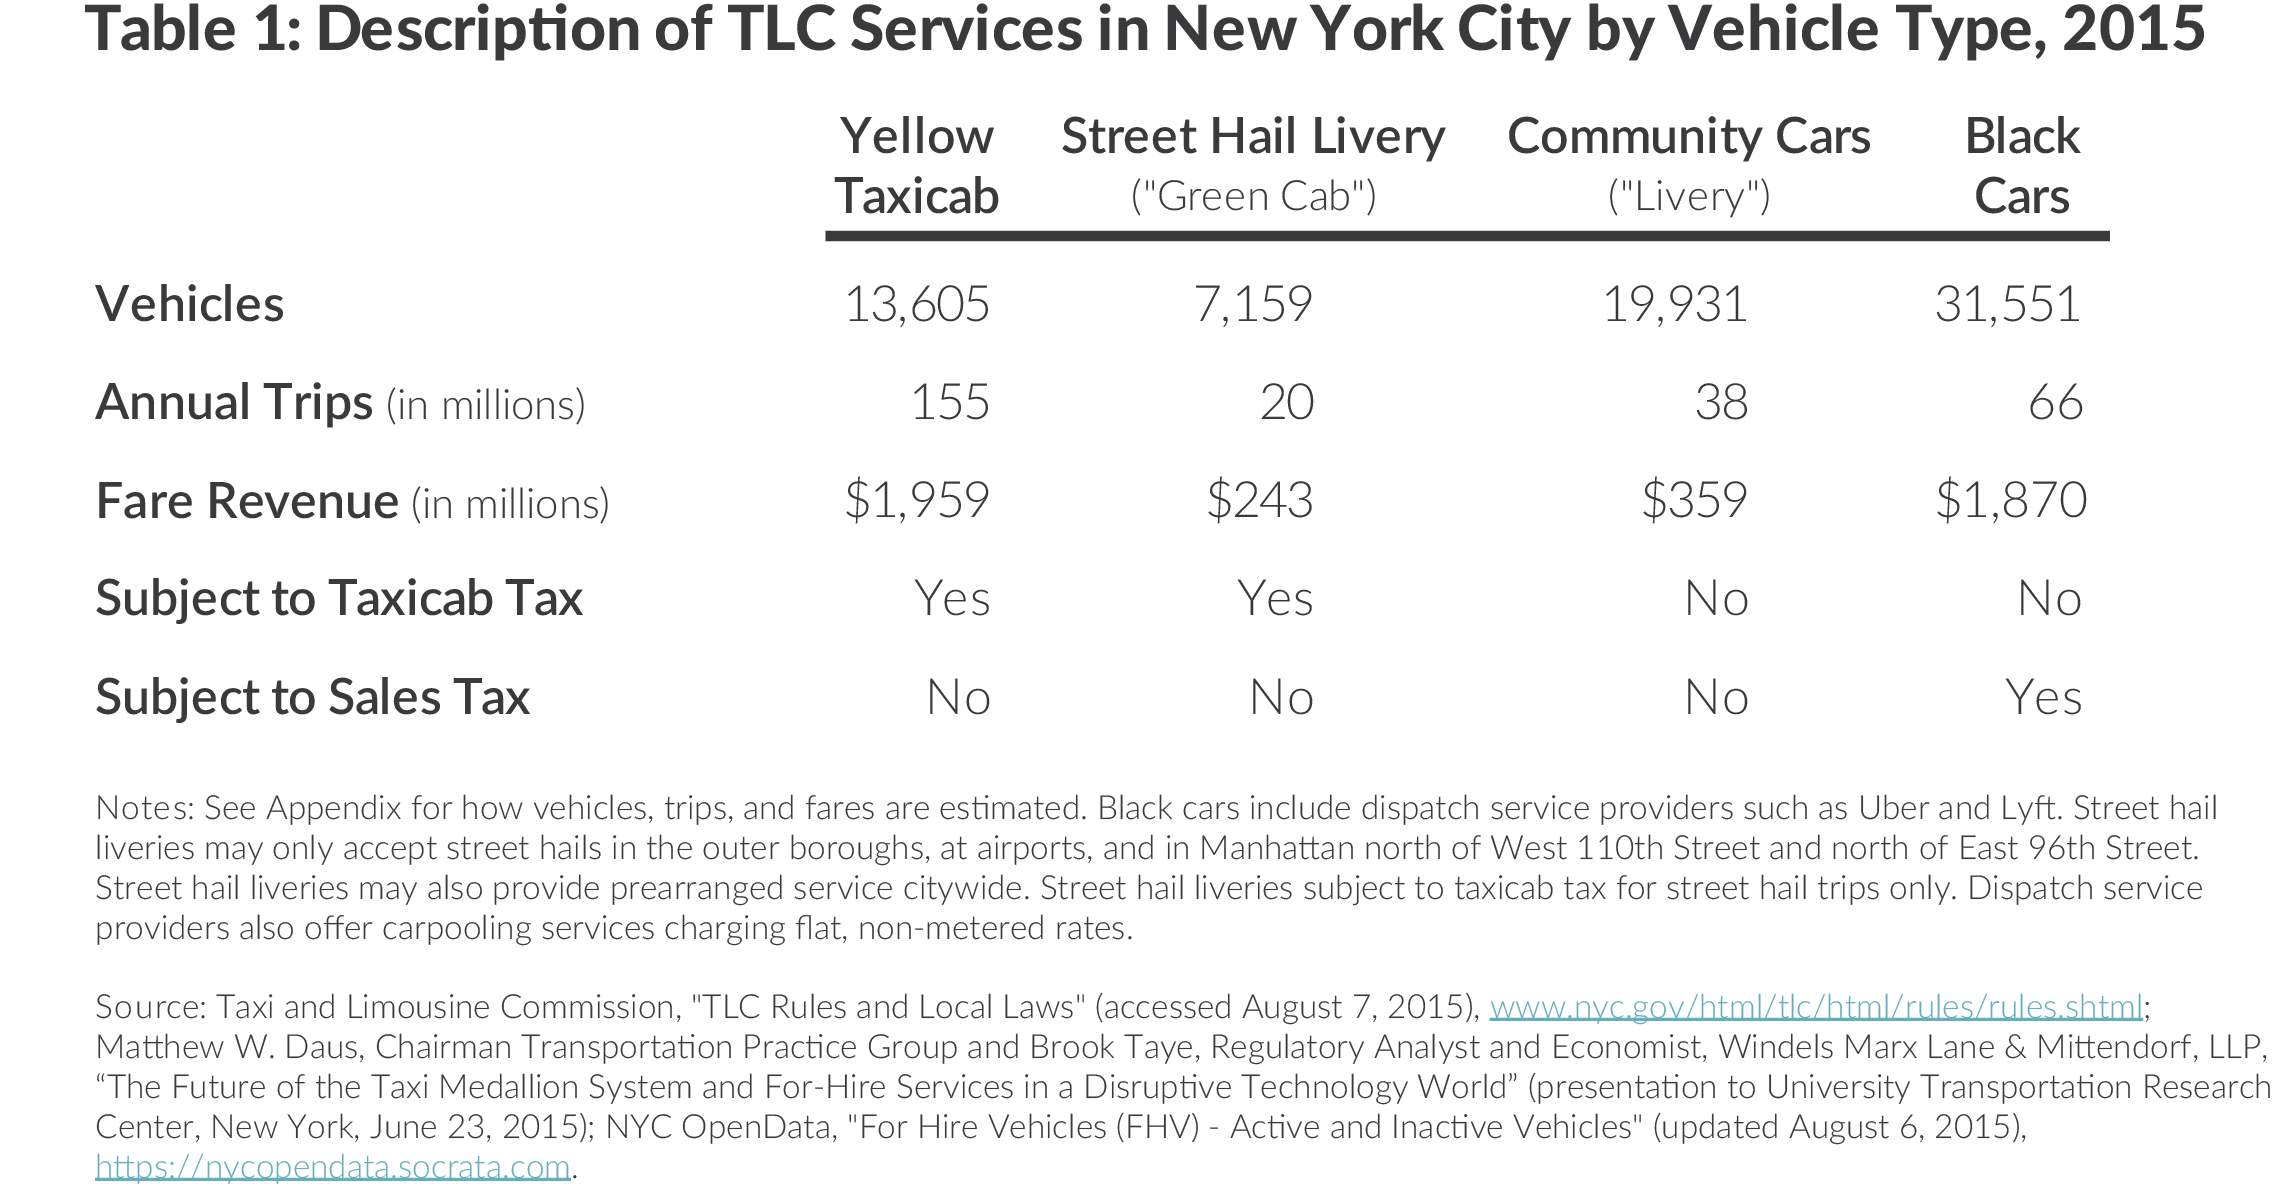 Table describing taxicab and limousine commission car services in New York City by vehicle type, vehichles, annual trips, fare revenue, yellow cab, street hail livery, green cab, community cars, livery, black cars